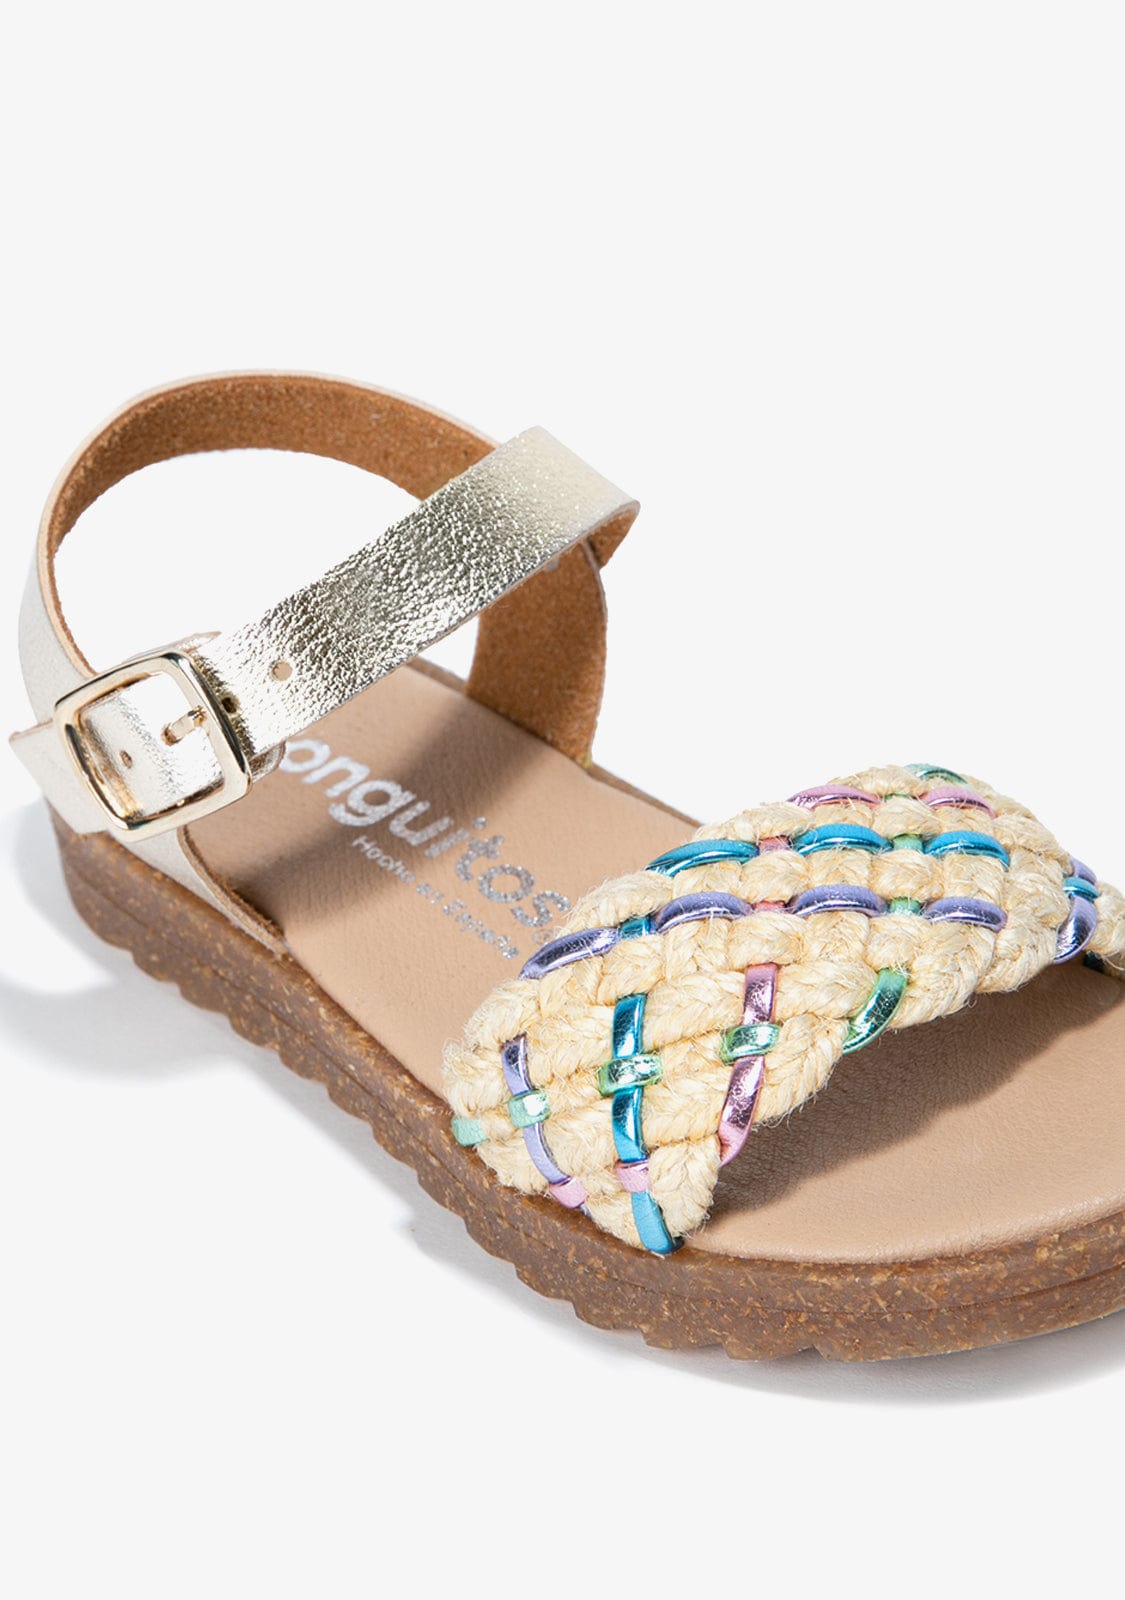 CONGUITOS Shoes Girl's Multicolour Braided Metallized Sandals